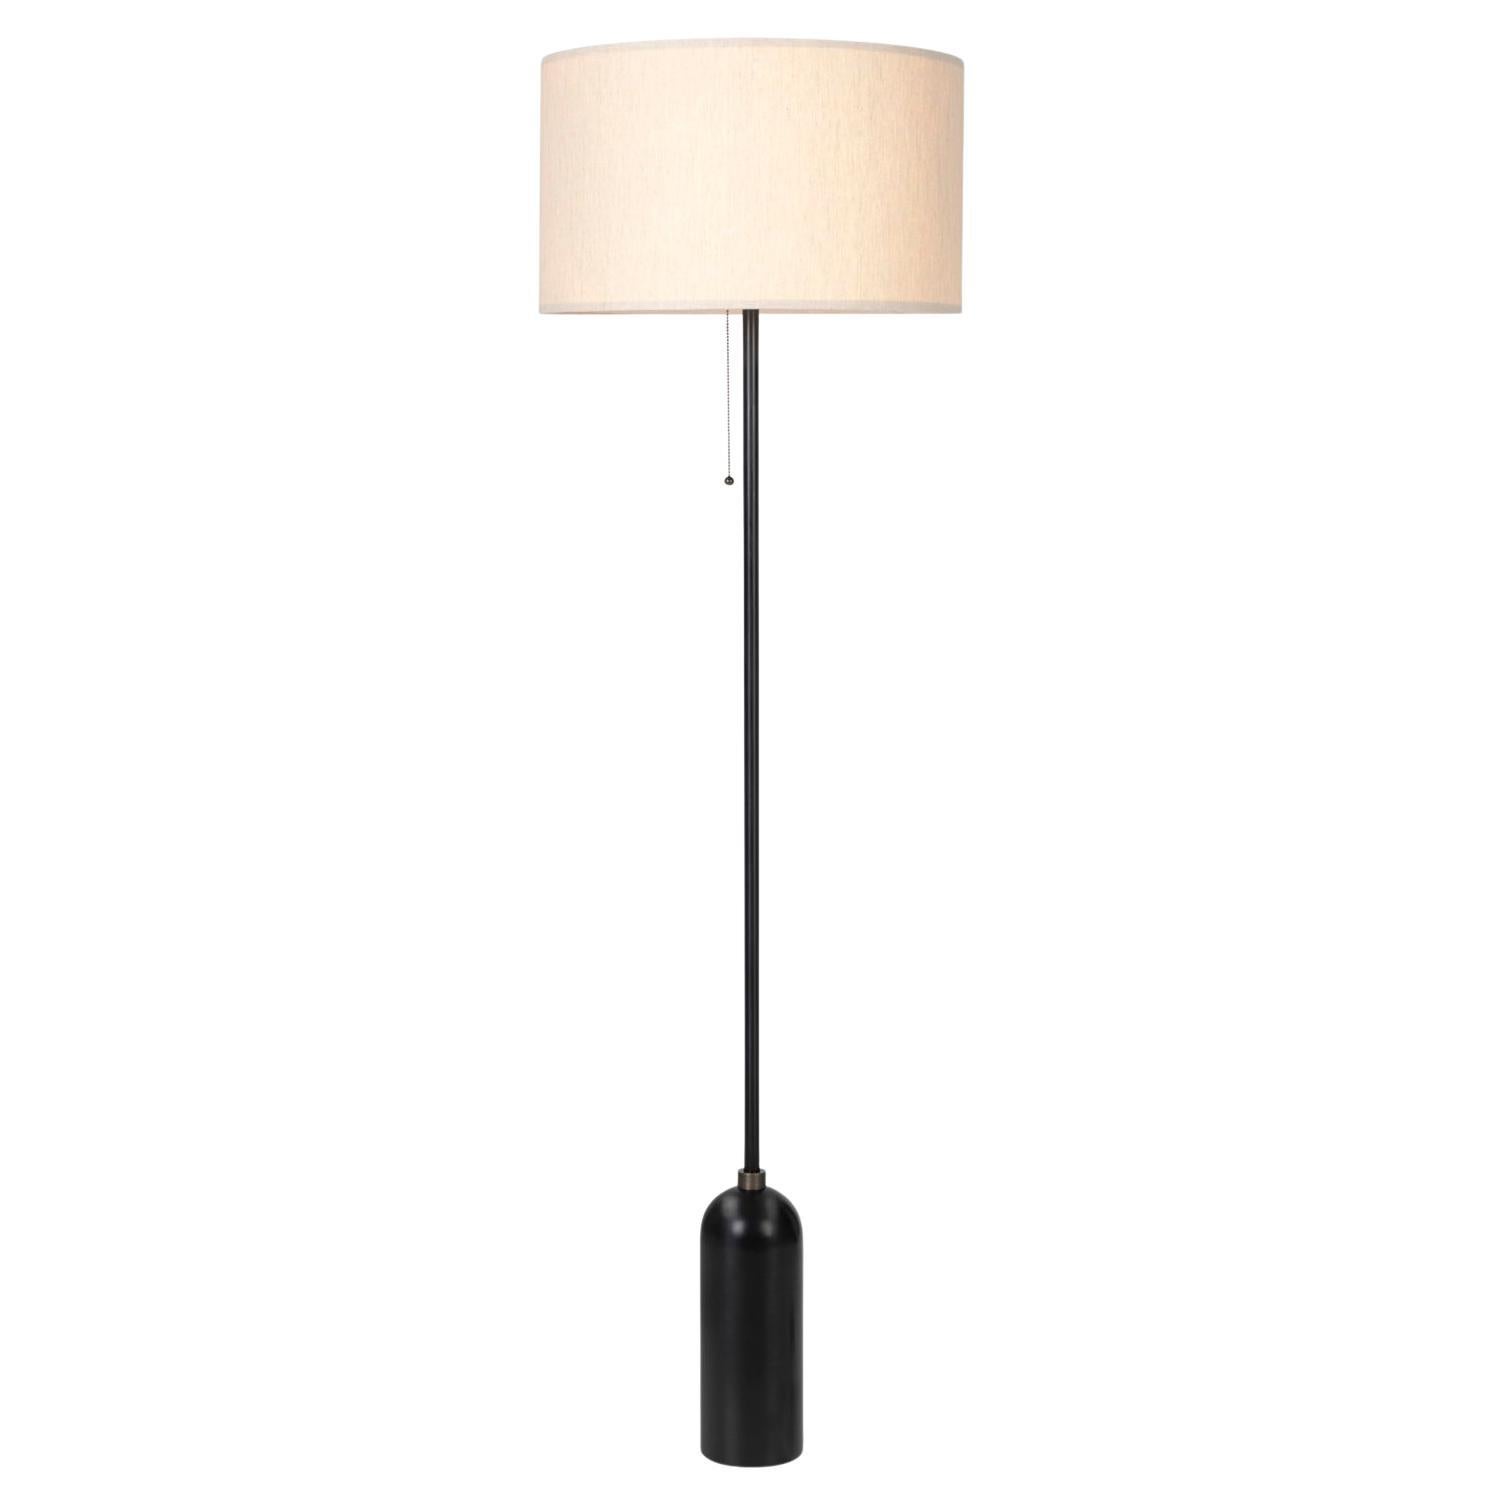 'Gravity' Blackened Steel Floor Lamp for Gubi with White Shade In New Condition For Sale In Glendale, CA